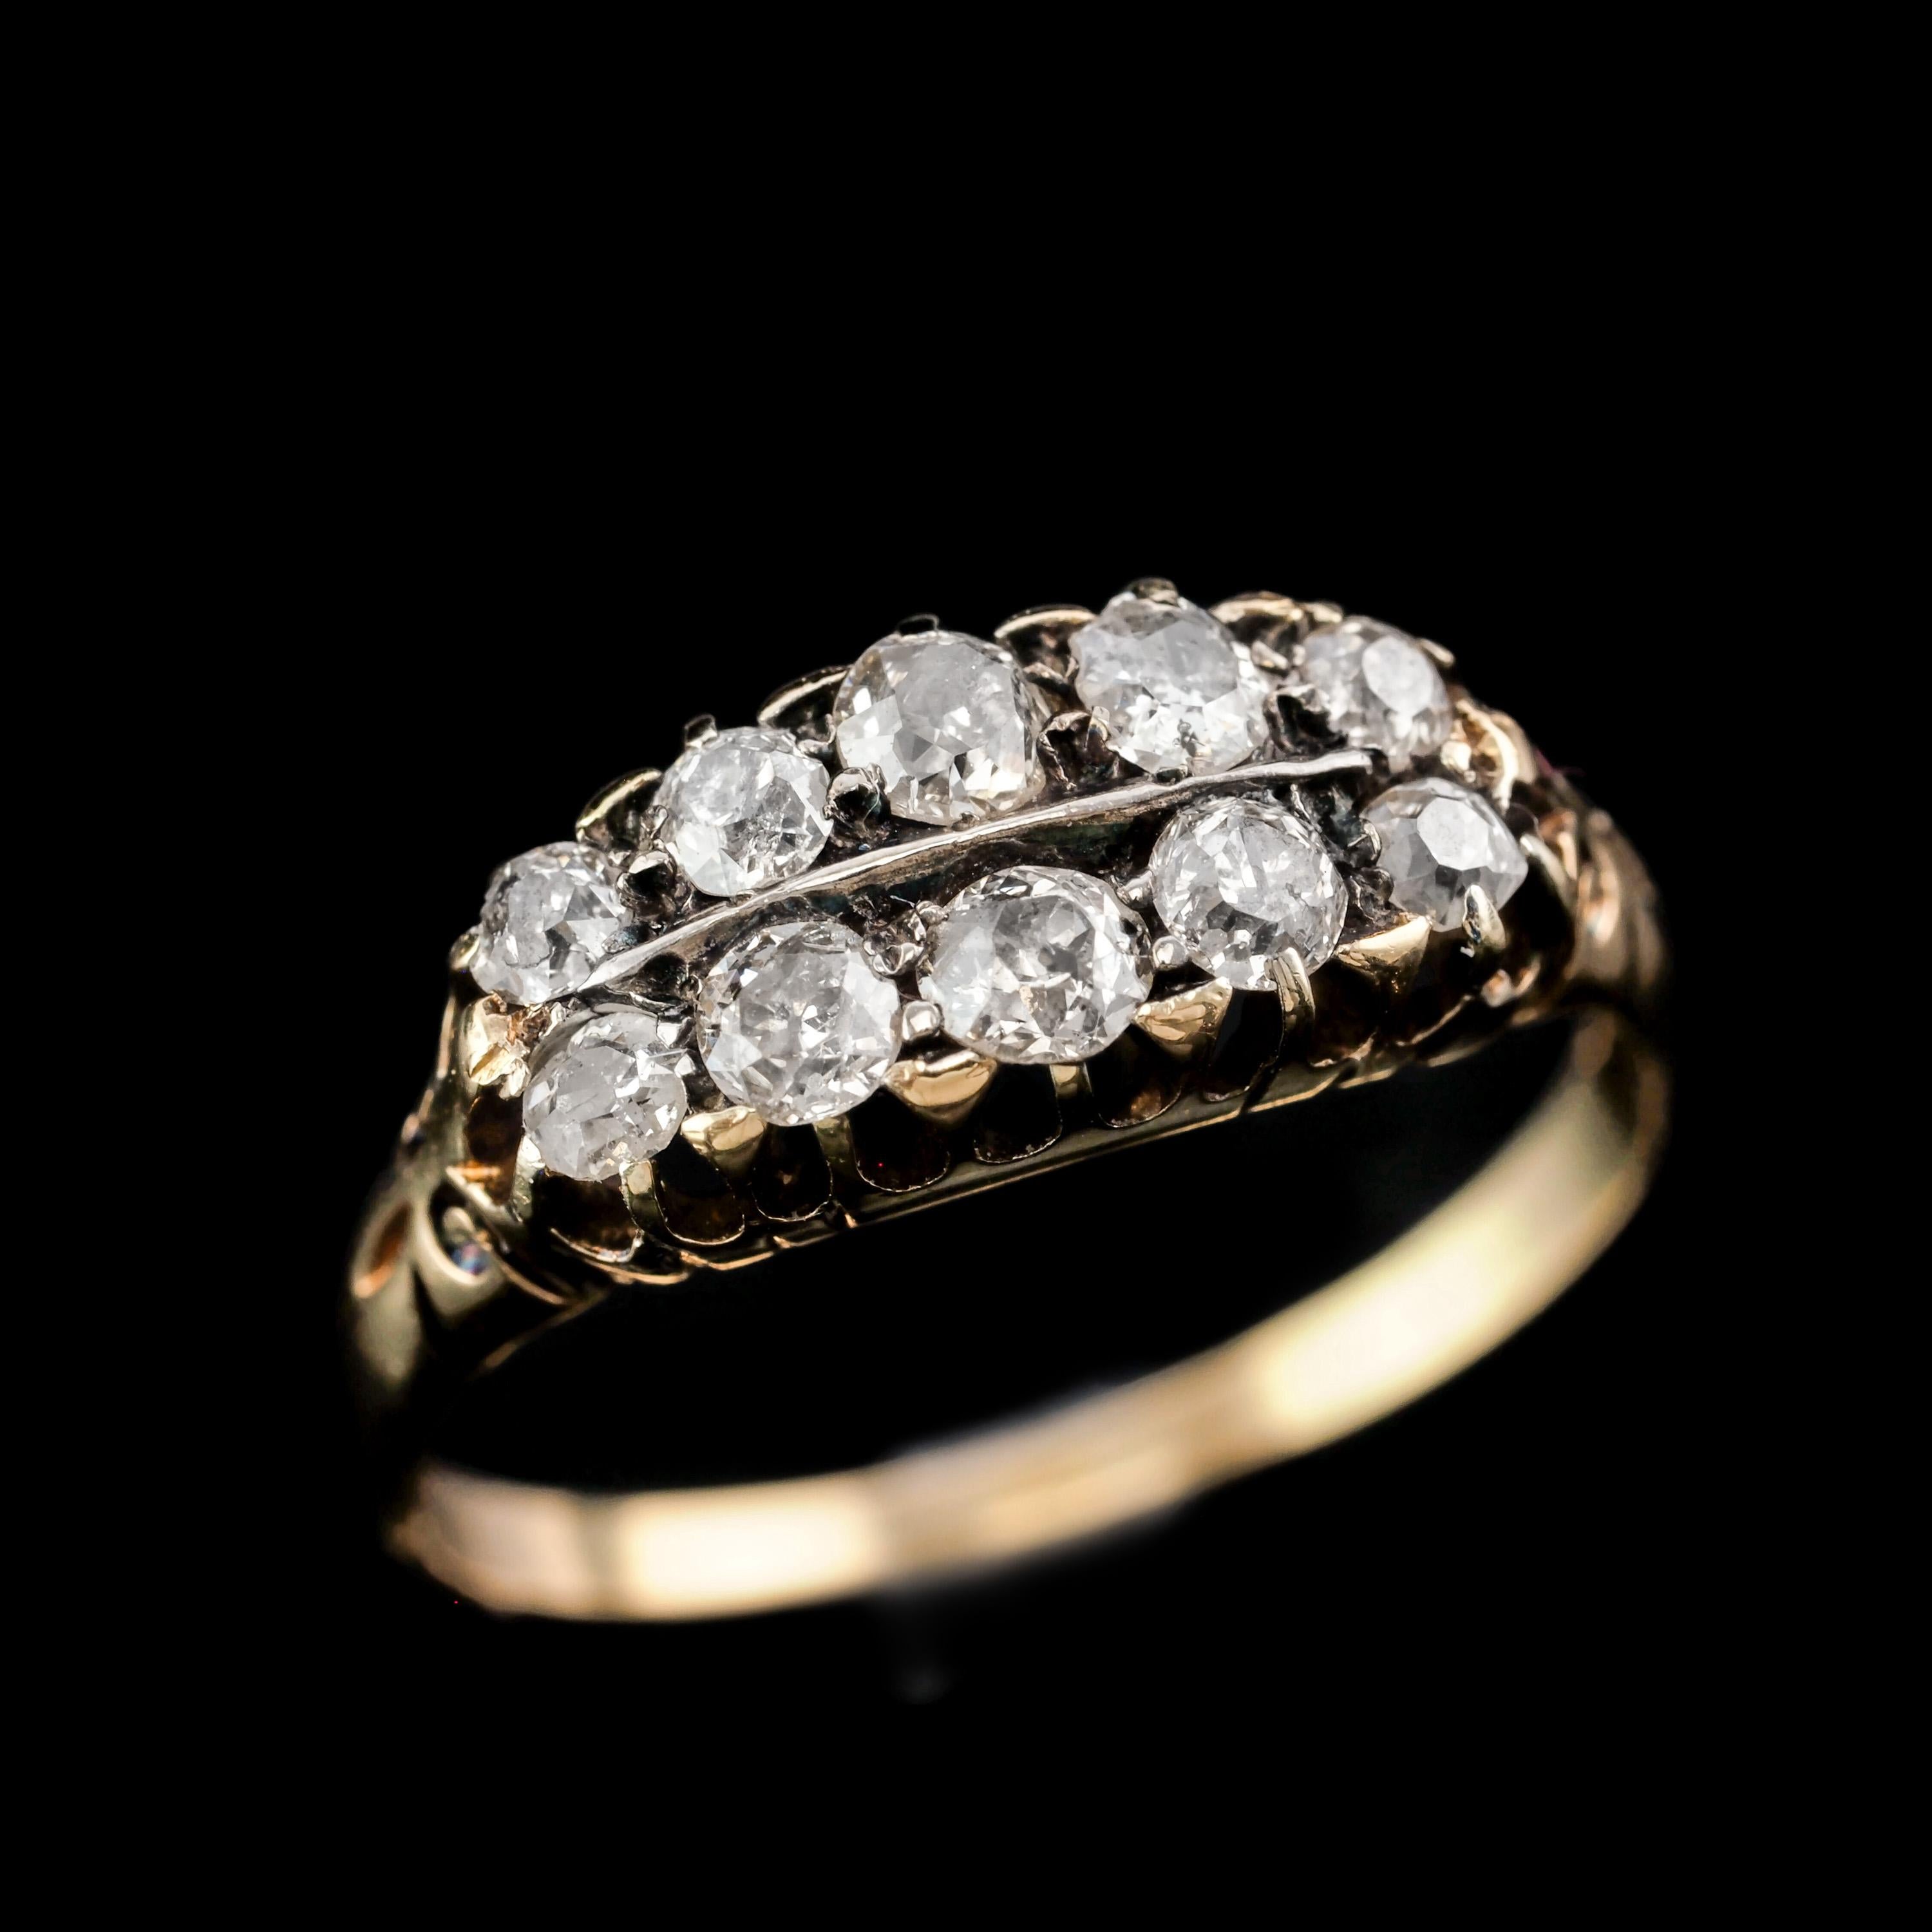 Antique Victorian 18K Gold Diamond Ring Old Cut - Boat Shaped c.1890 For Sale 11